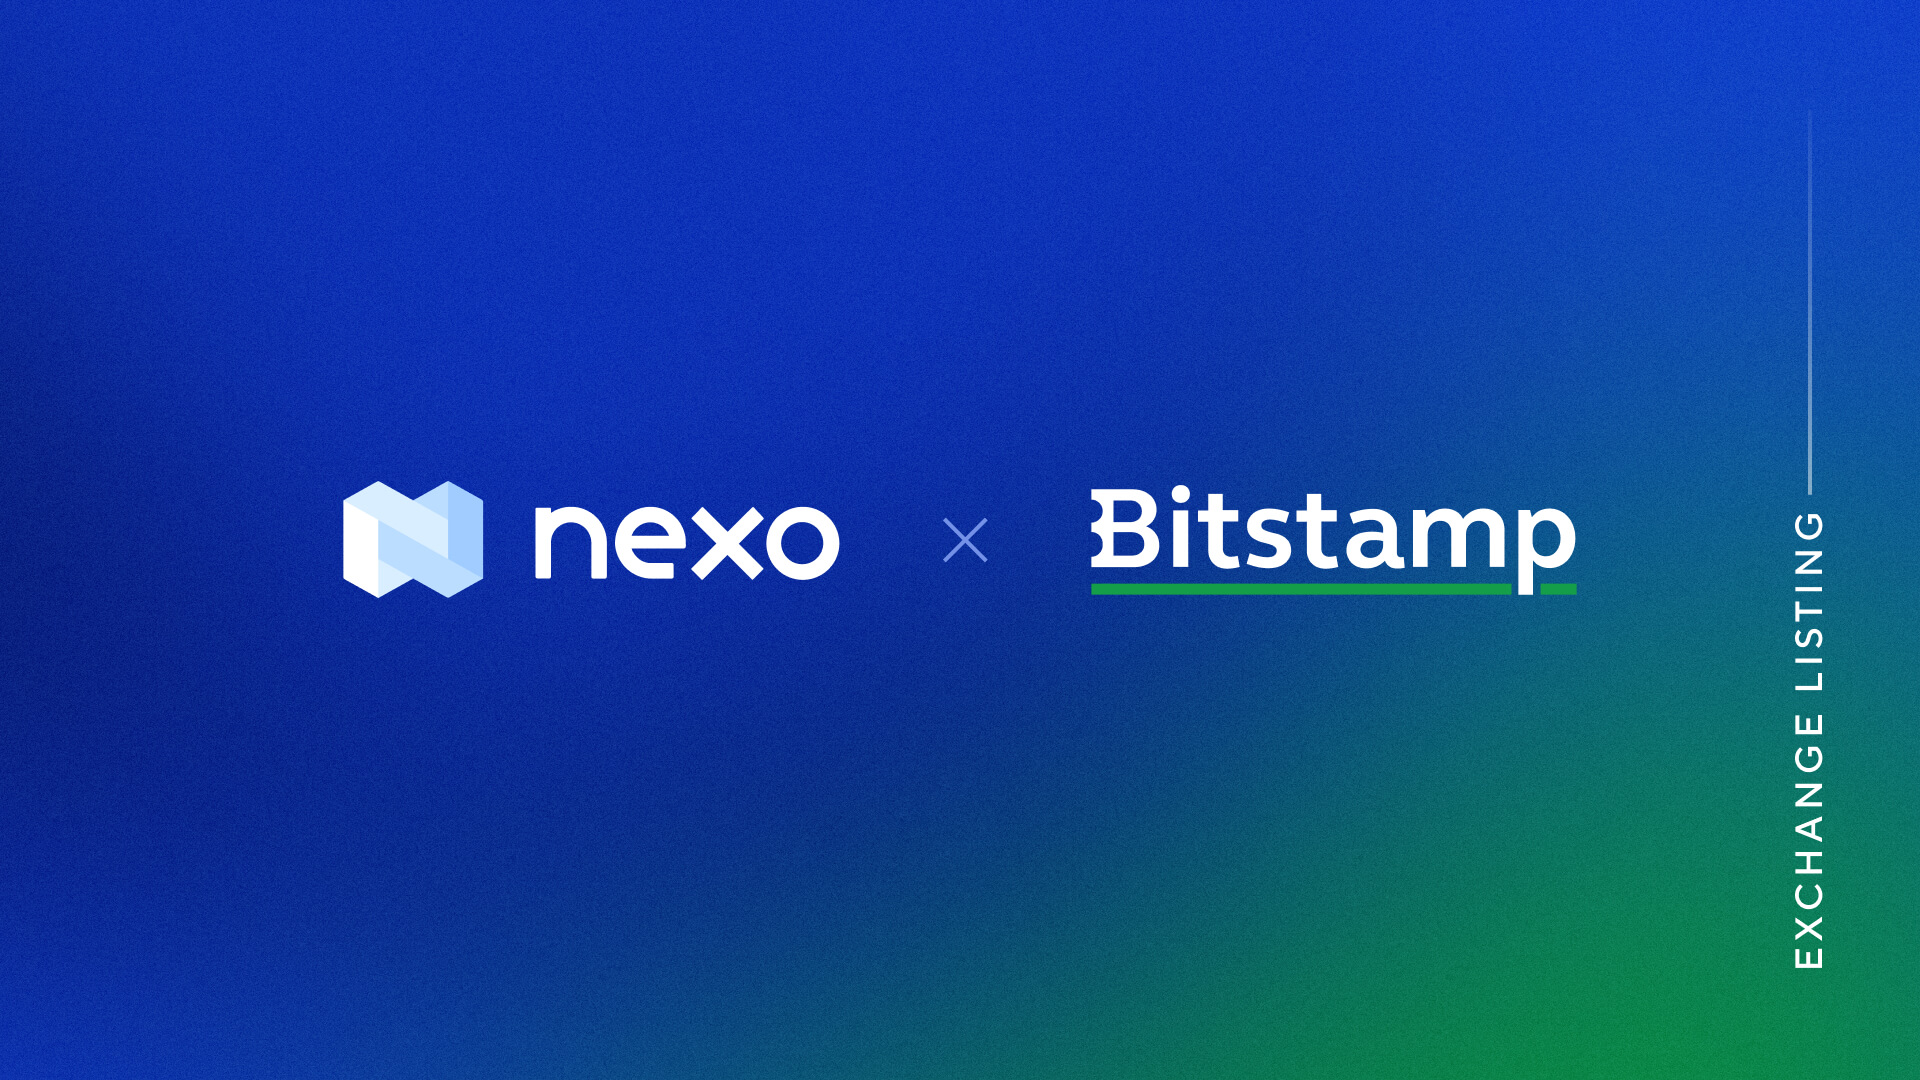 The NEXO Token Is Now Available on Bitstamp!